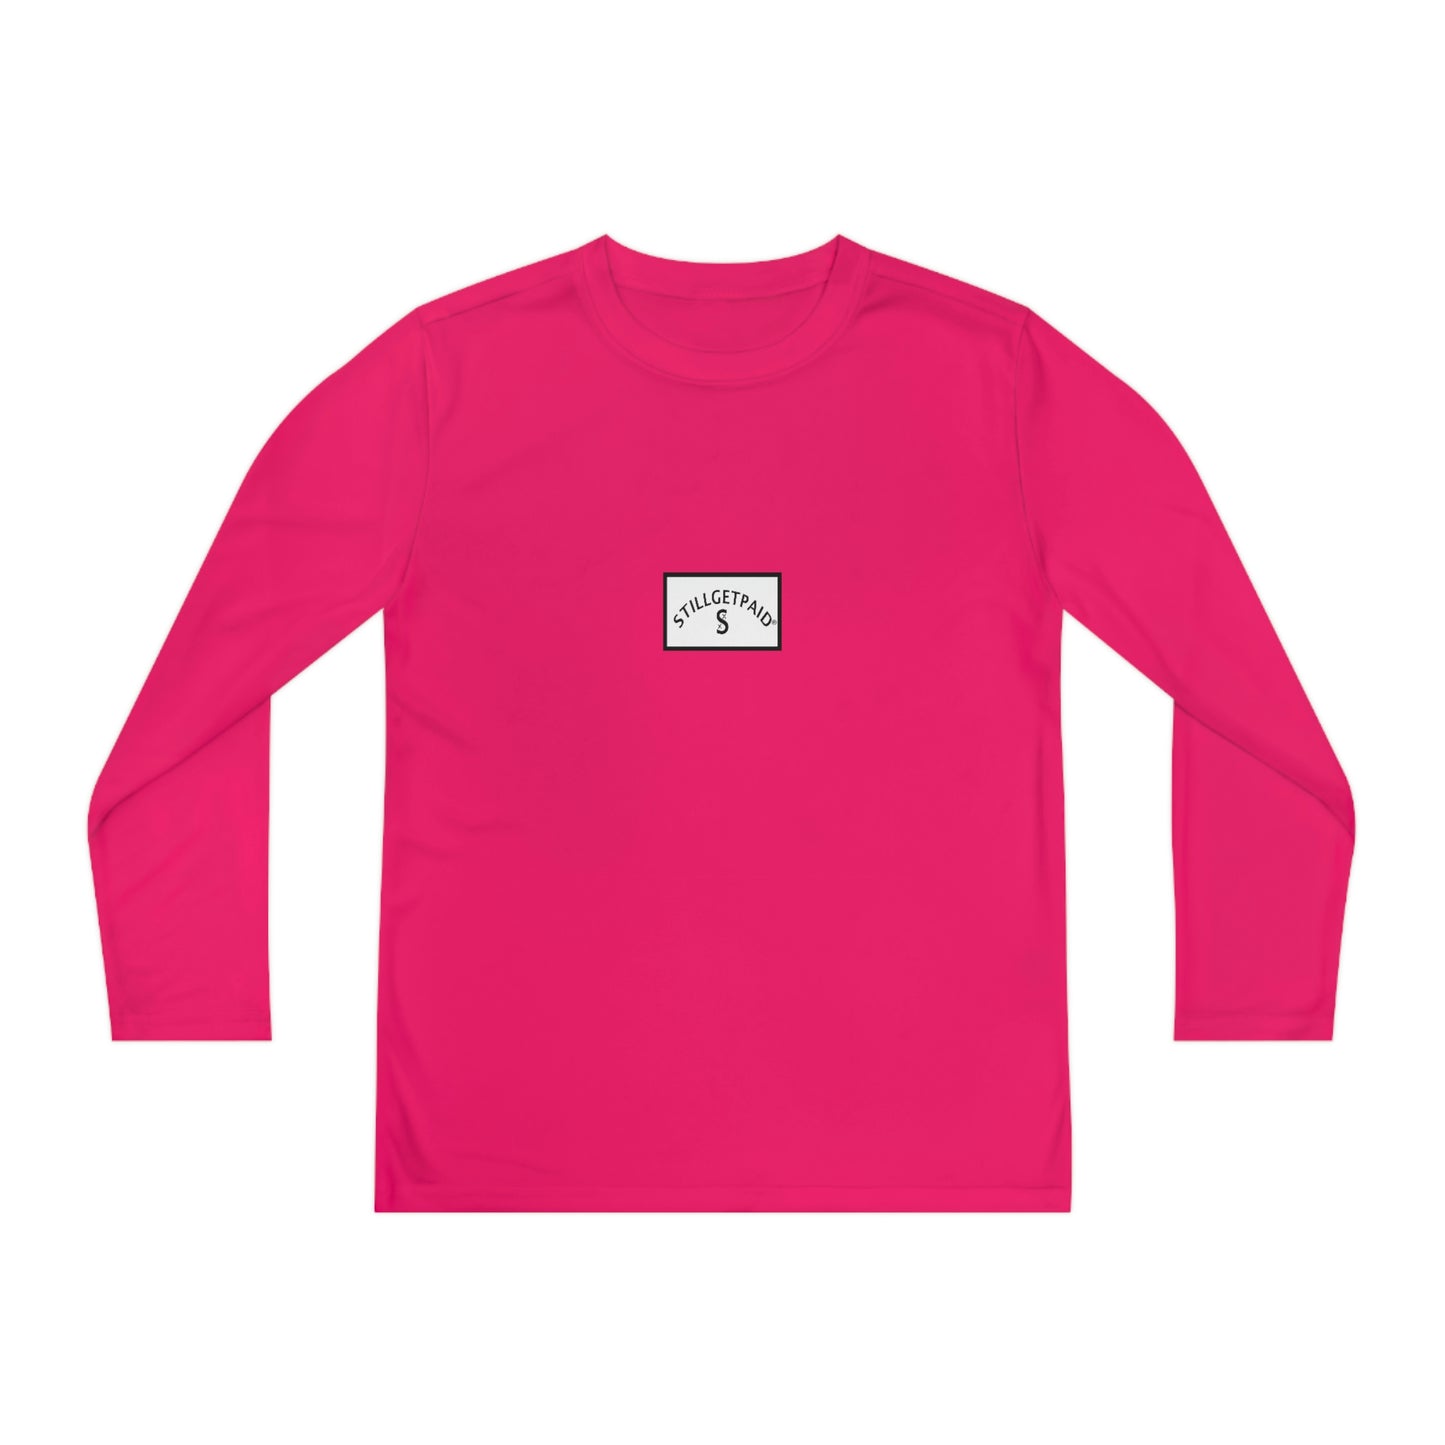 STILLGETPAID®️ APPAREL Youth Long Sleeve Competitor Tee